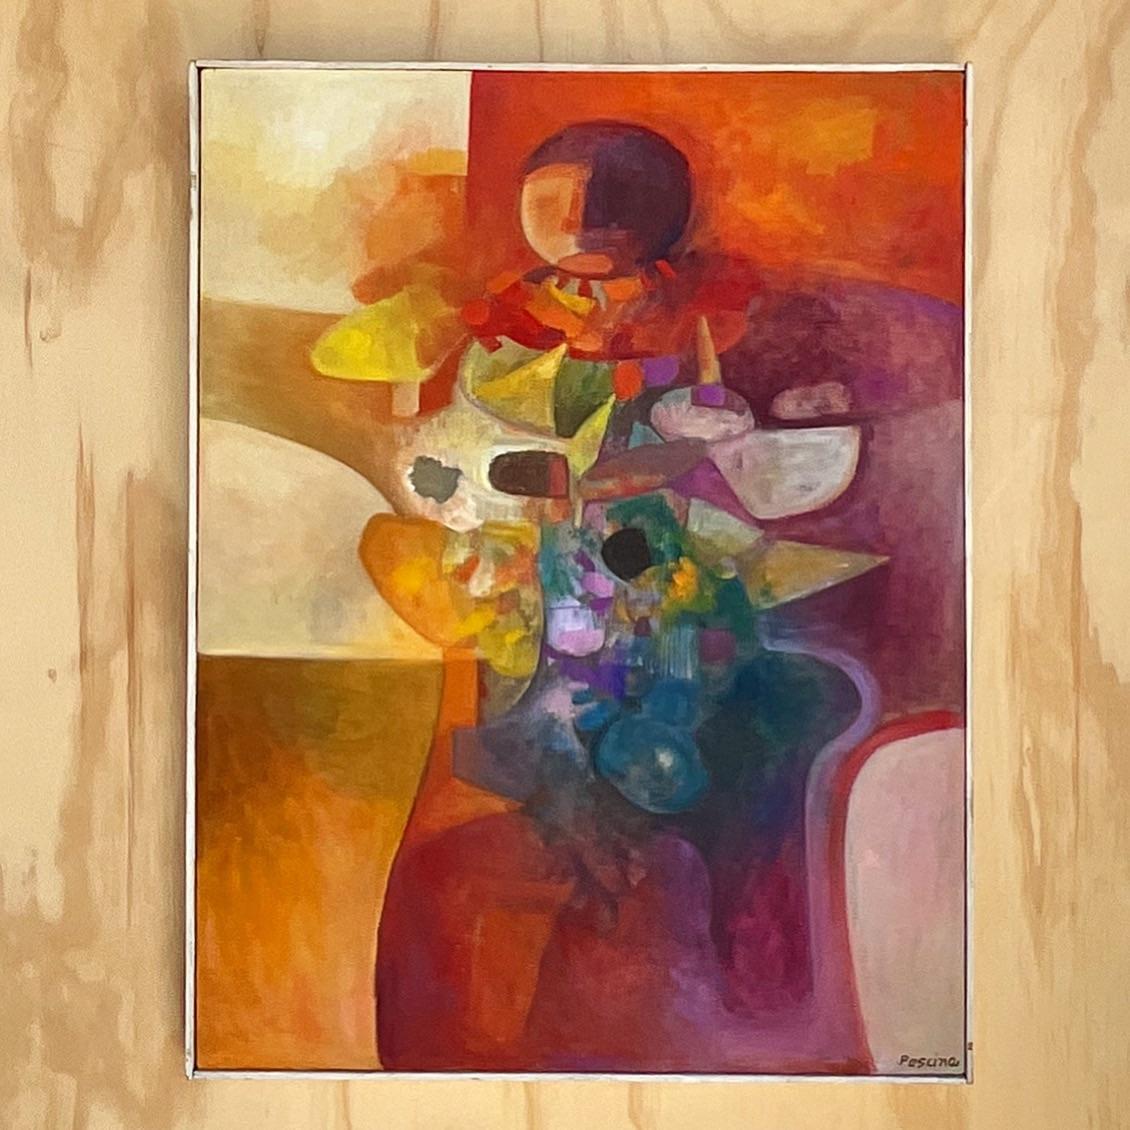 Incredible vintage 70s Cubist abstract original oil painting. Signed by the artist Pescina. Beautiful jewel tone colors dominate this brilliant composition. Acquired from a Palm Beach estate